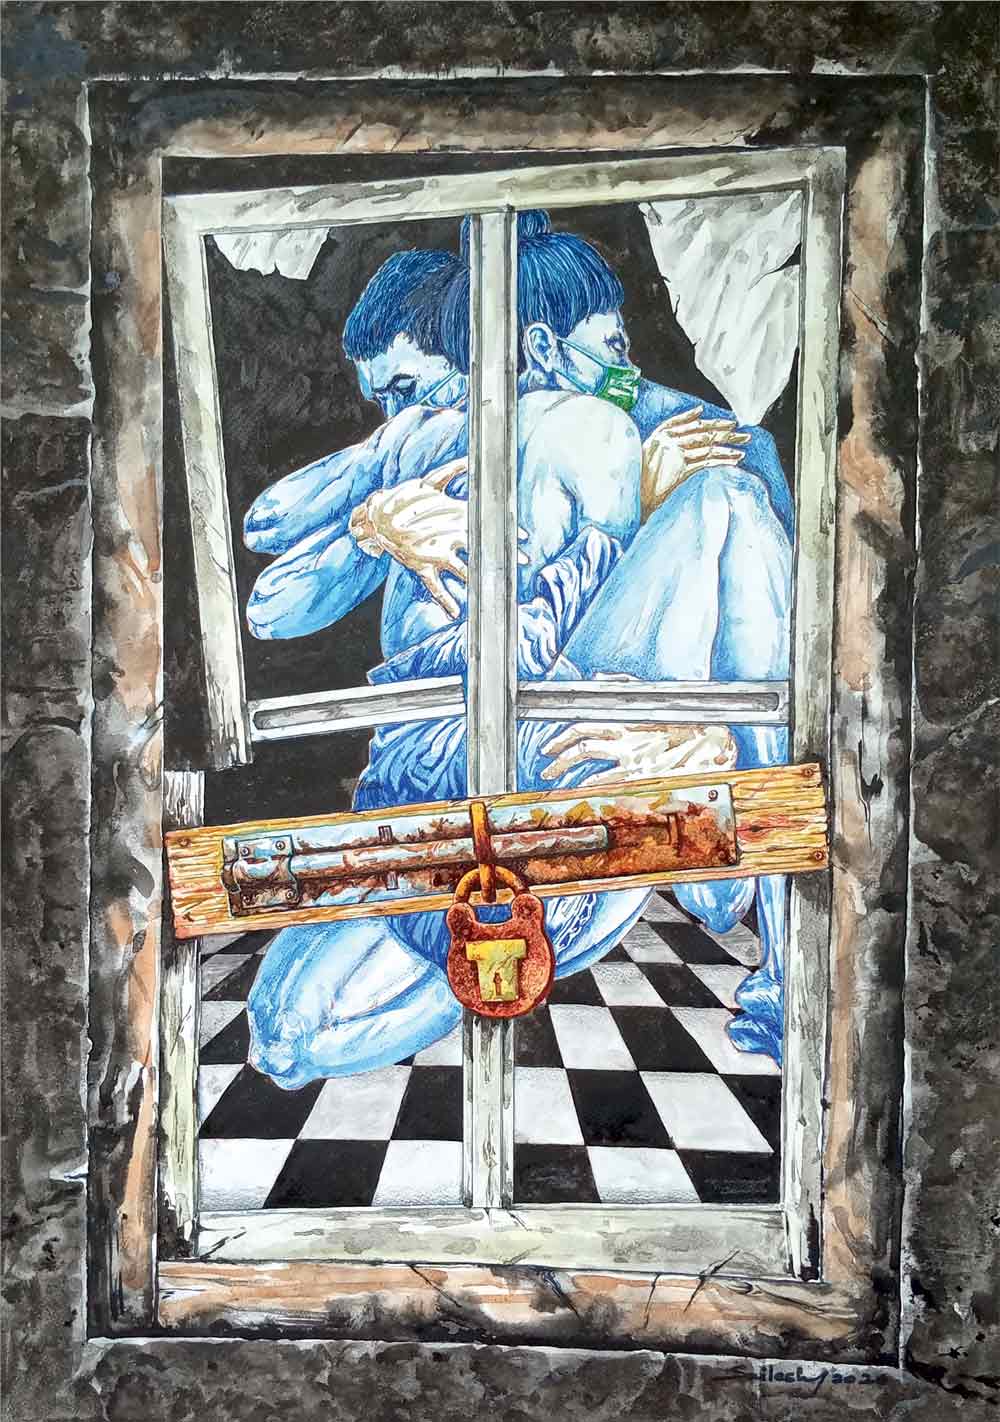 Figurative Drawing with Mixed Media on Paper "Lockdown-2" art by Sailesh Bose